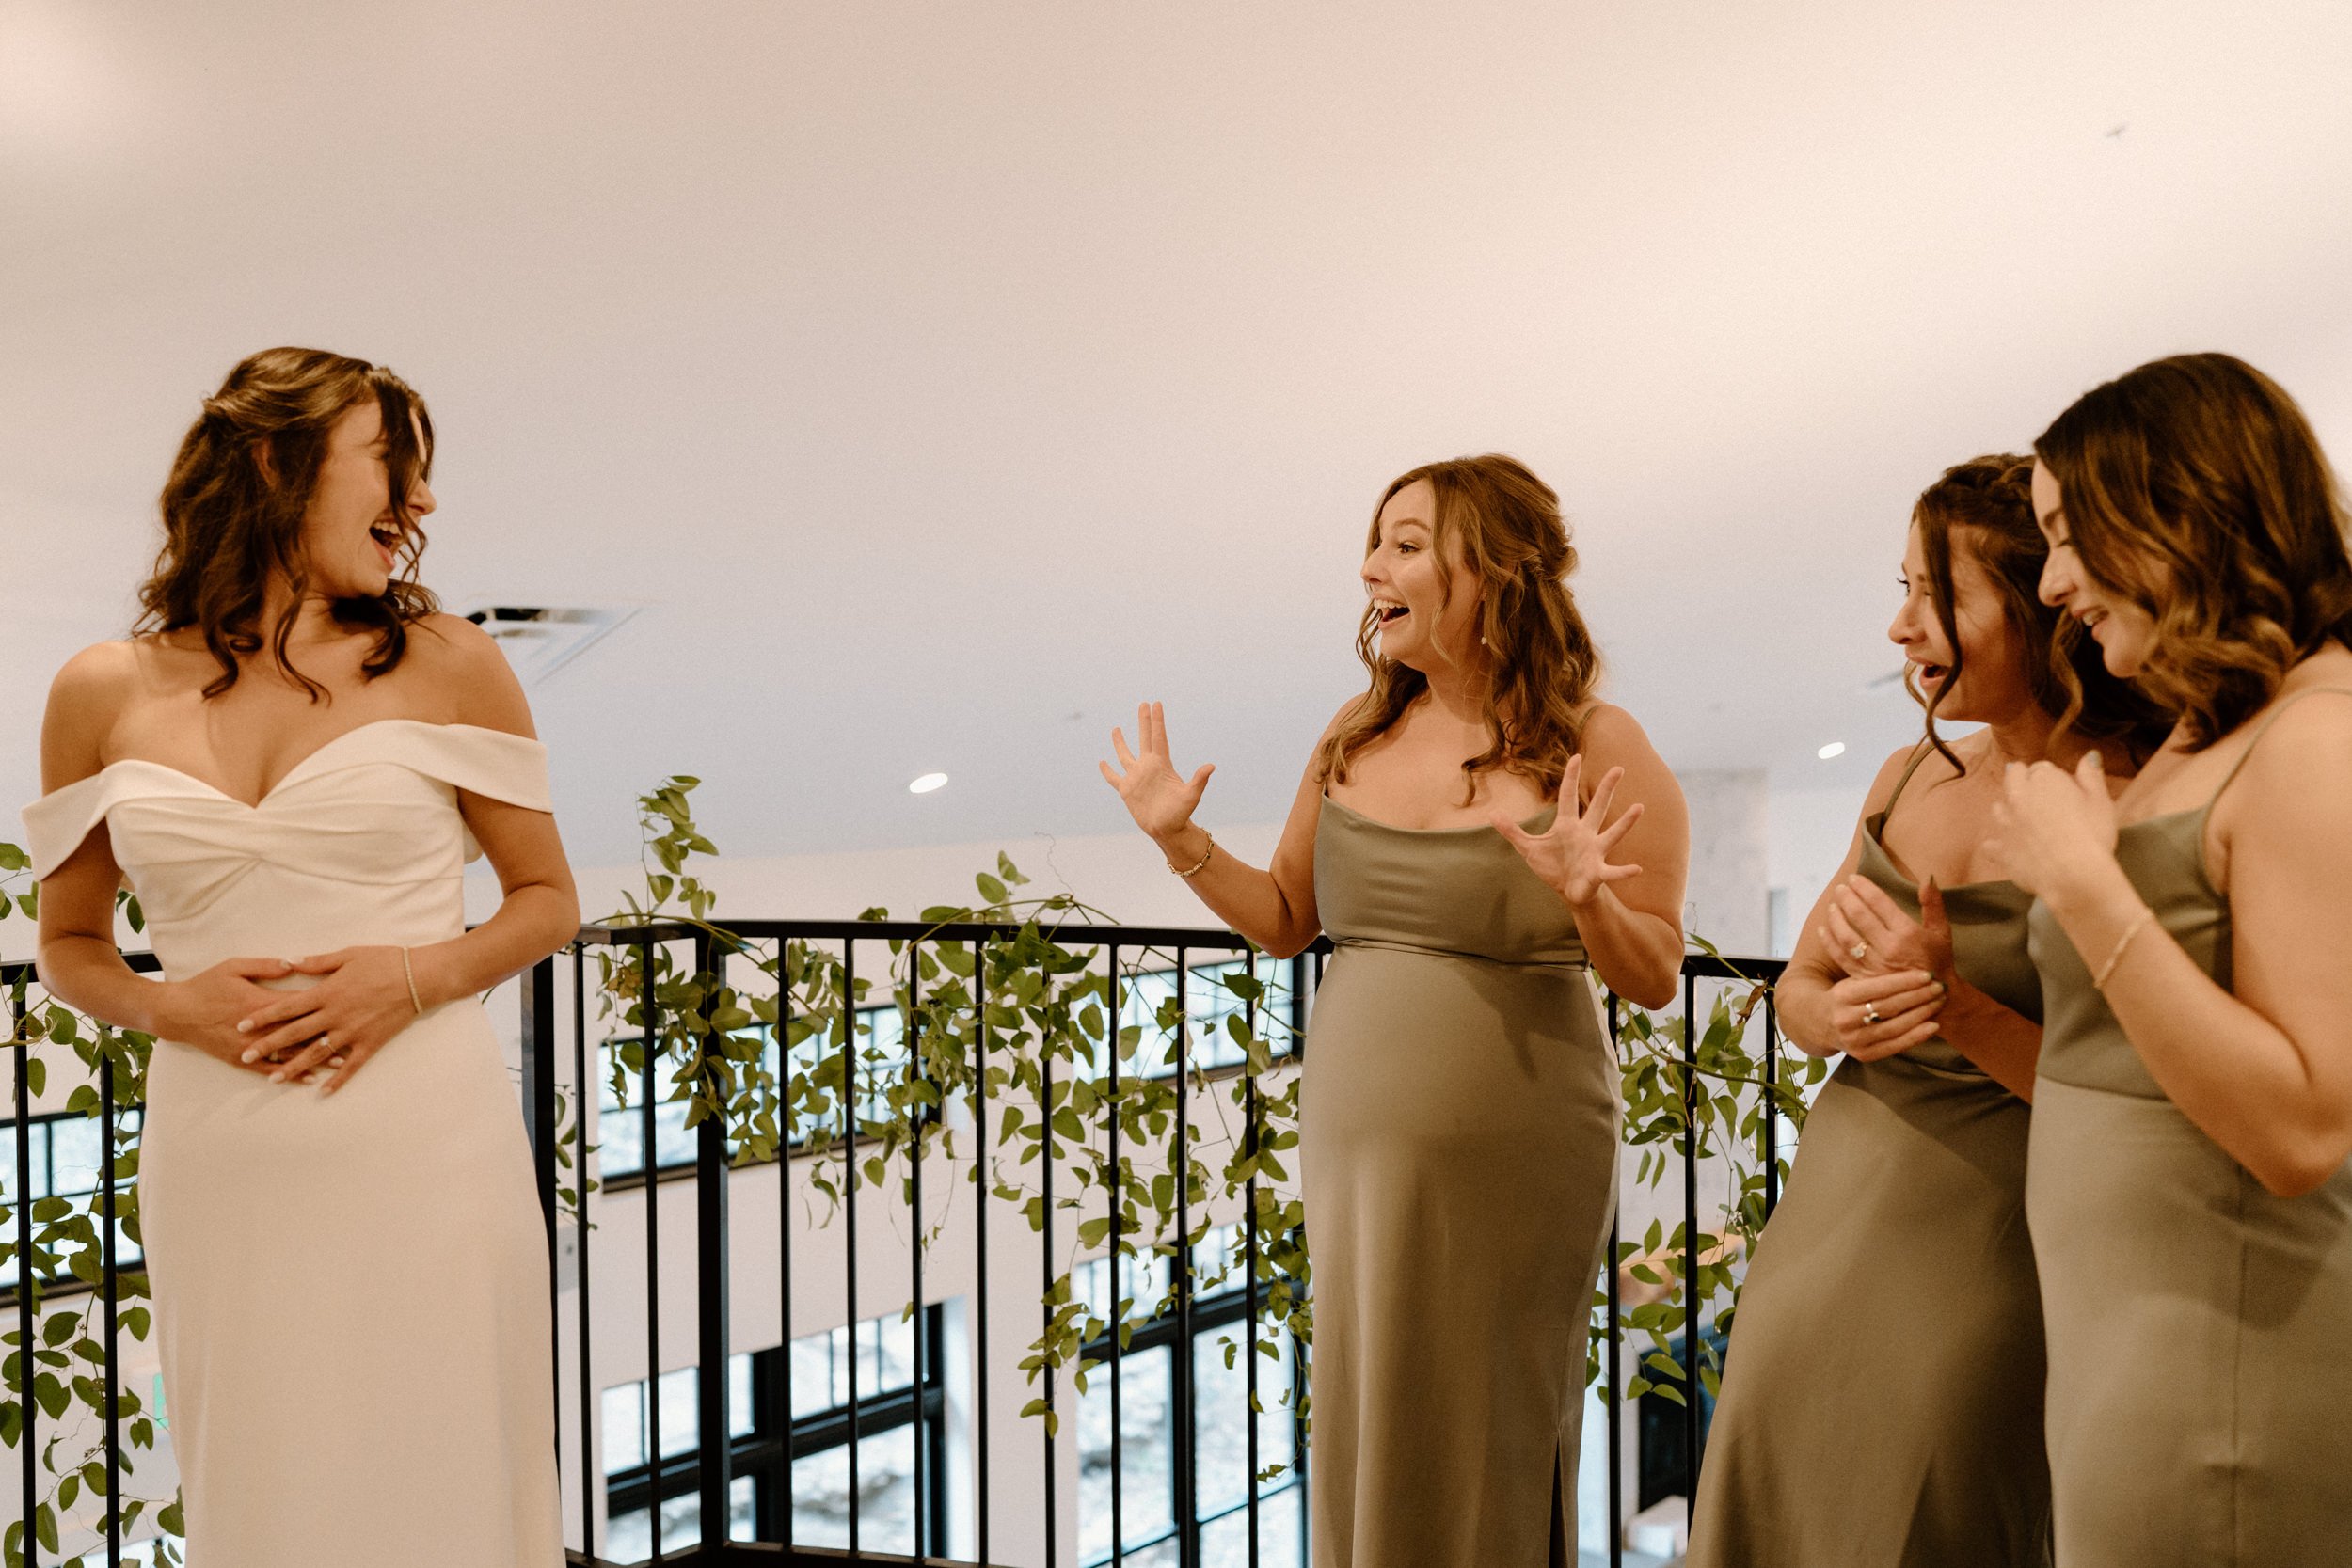 The bridesmaids smile in shock at seeing the bride for the first time in her dress